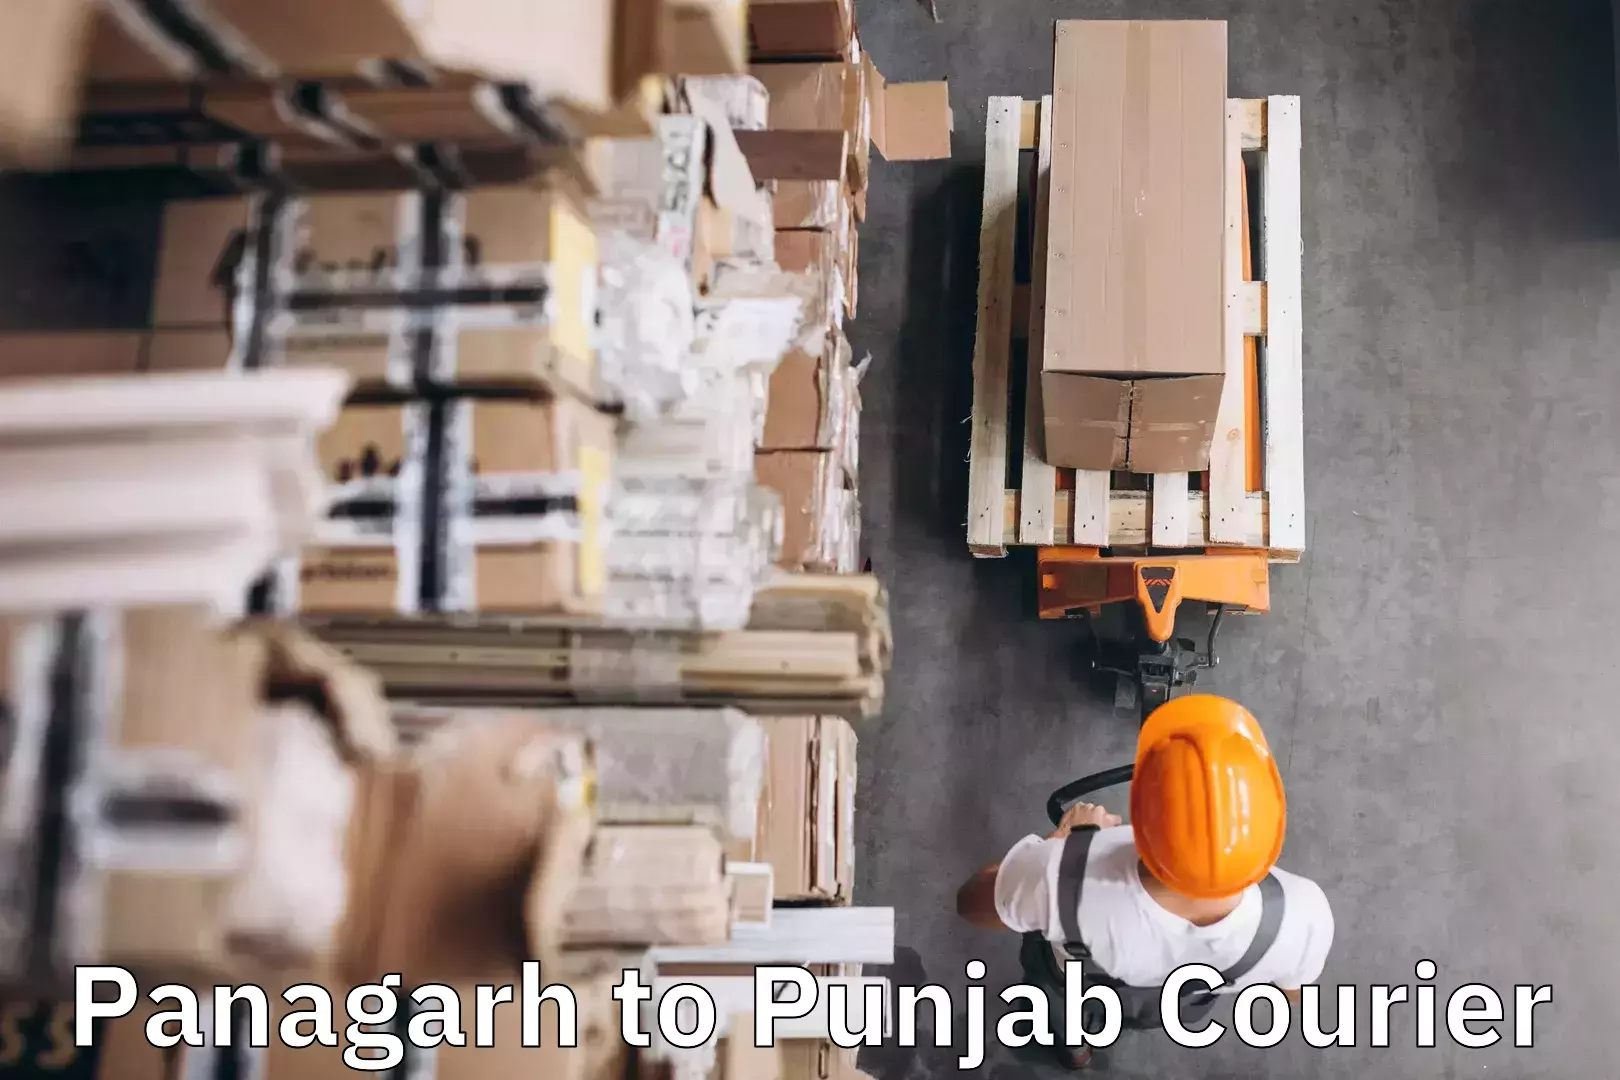 Automated luggage transport Panagarh to Thapar Institute of Engineering and Technology Patiala